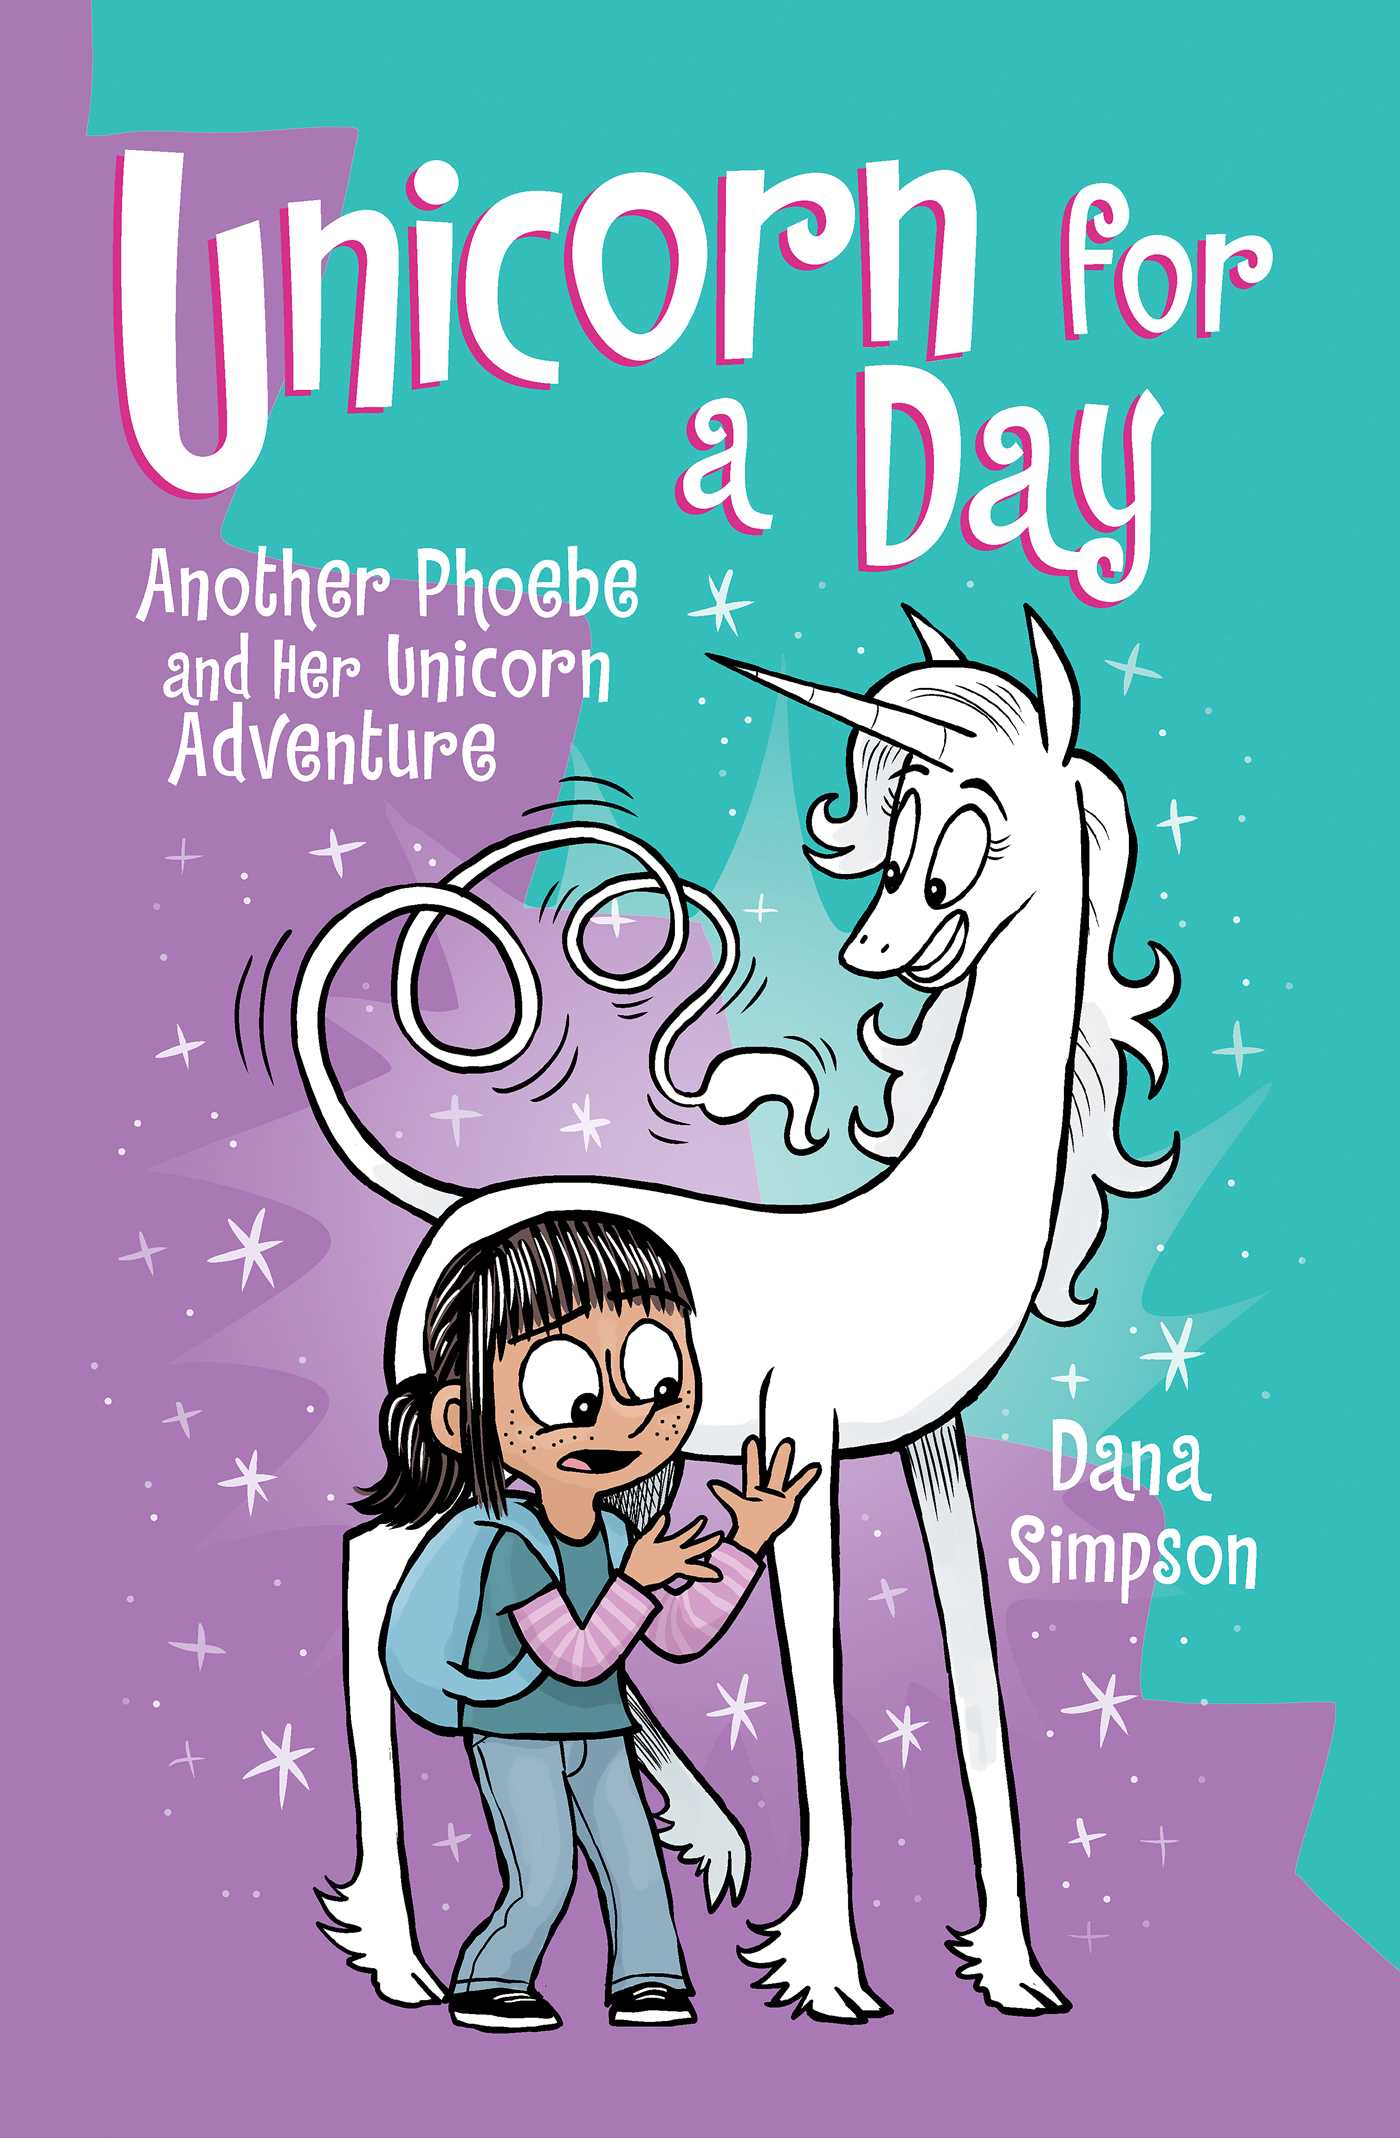 Another Phoebe and Her Unicorn Adventure Vol.18 - Unicorn for a Day | Simpson, Dana (Auteur)